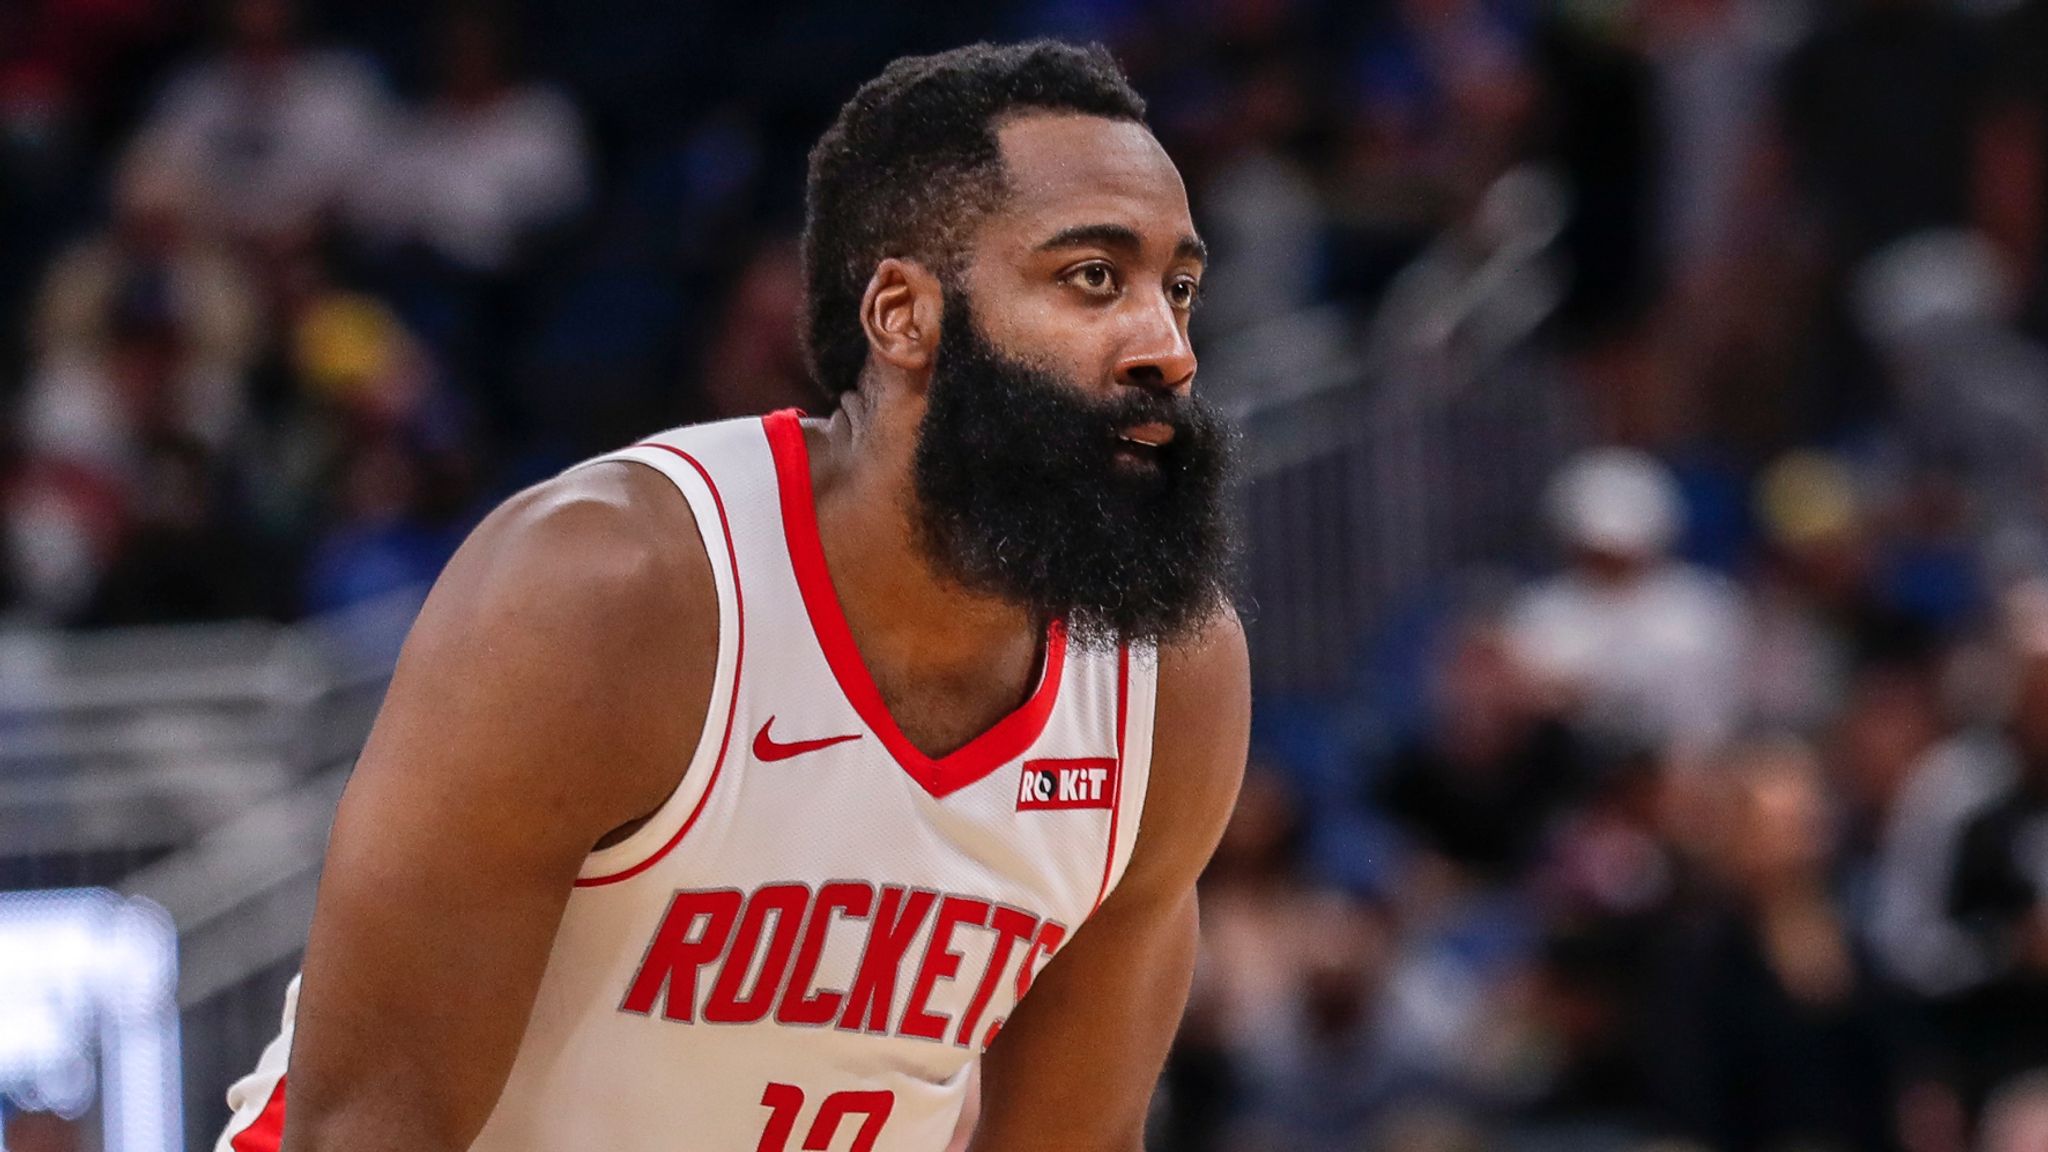 Rockets vs. Magic live stream: TV channel, how to watch